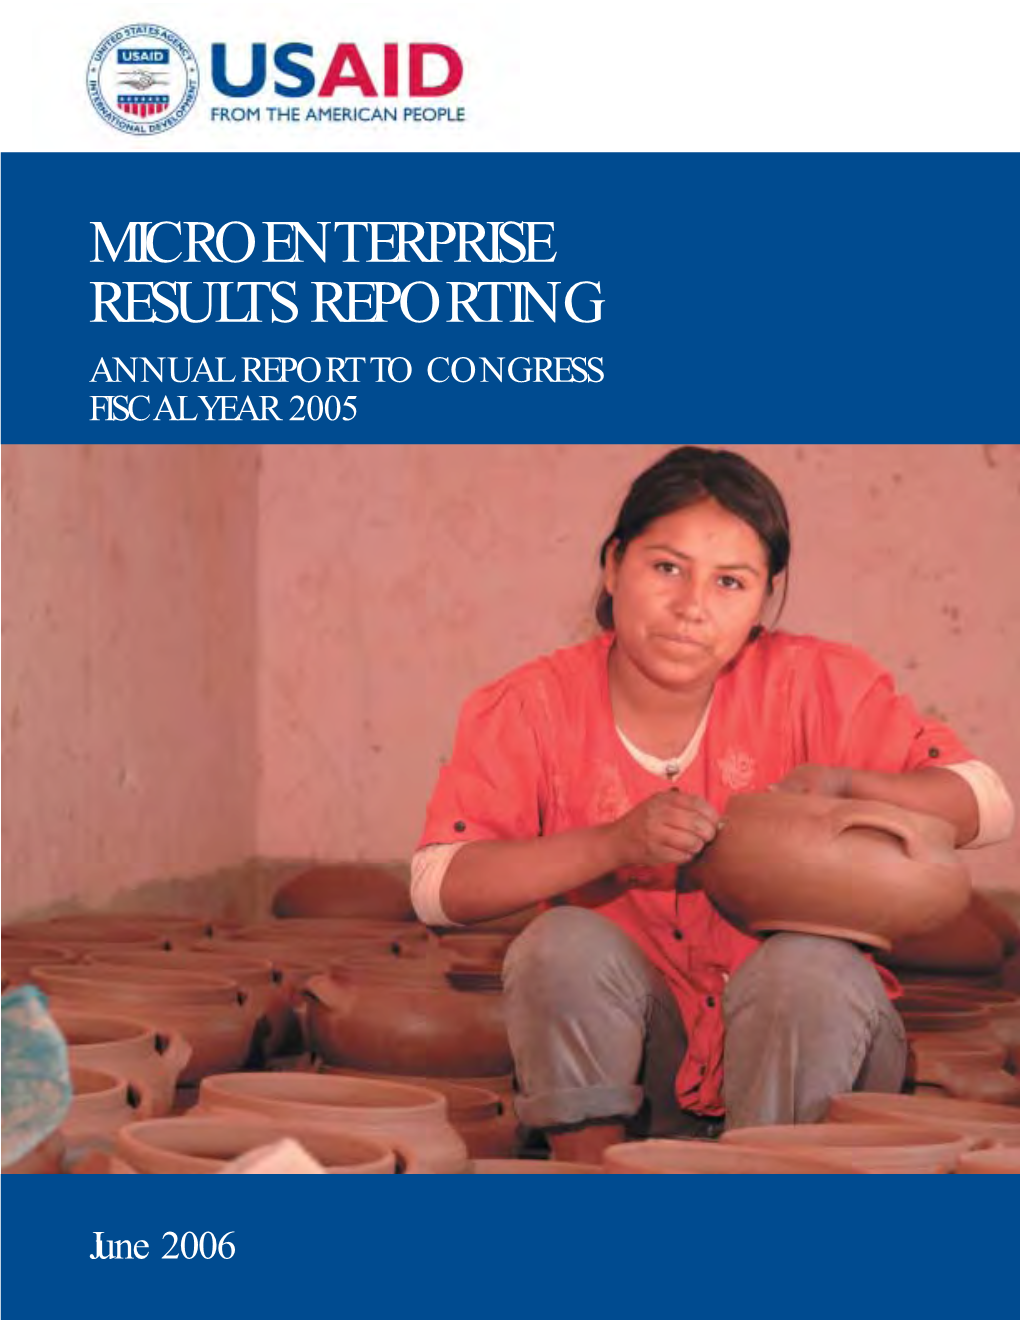 Microenterprise Results Reporting Annual Report to Congress Fiscal Year 2005